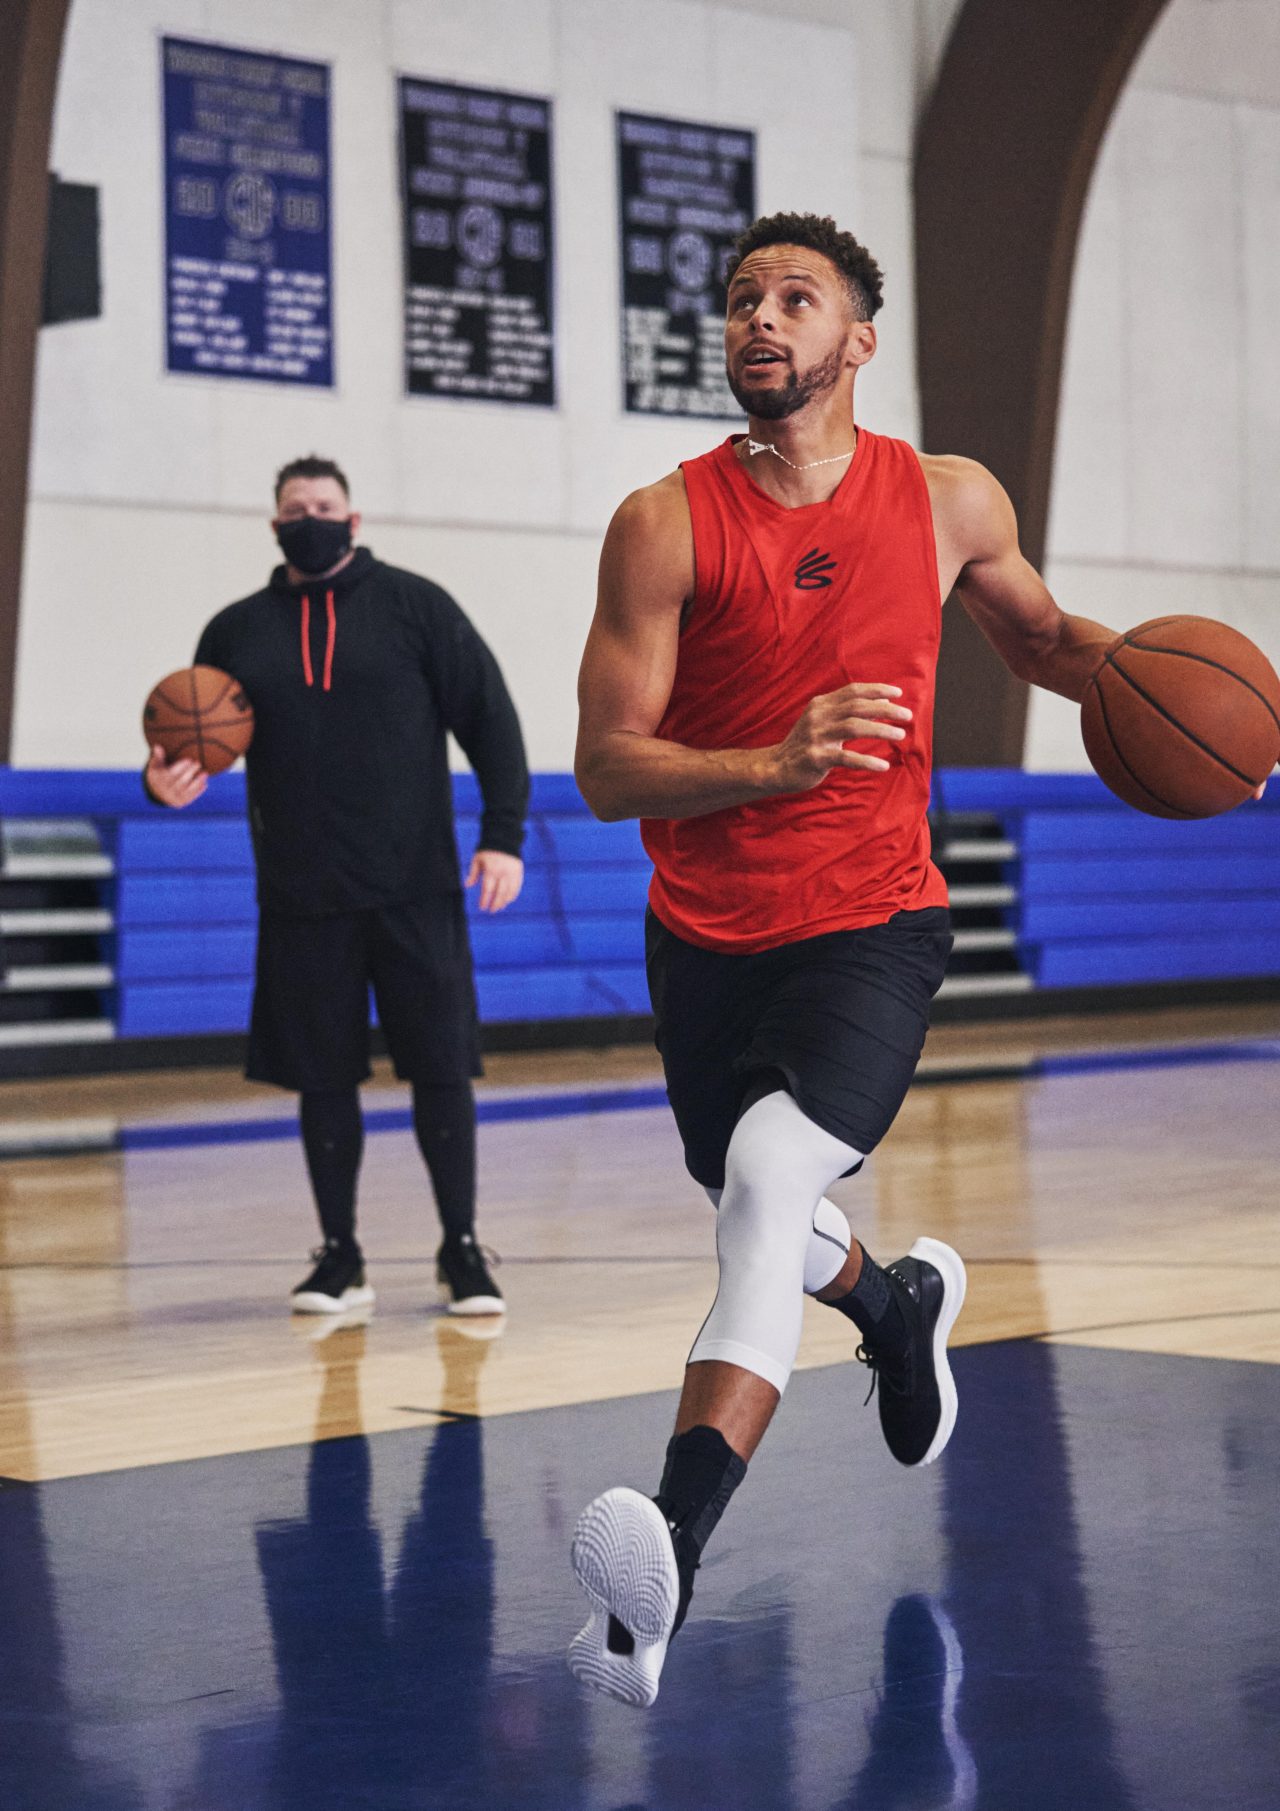 These 5 Simple Photos Show Why Sales of Under Armour's (UA) Stephen Curry  Basketball Sneakers Have Slowed - TheStreet